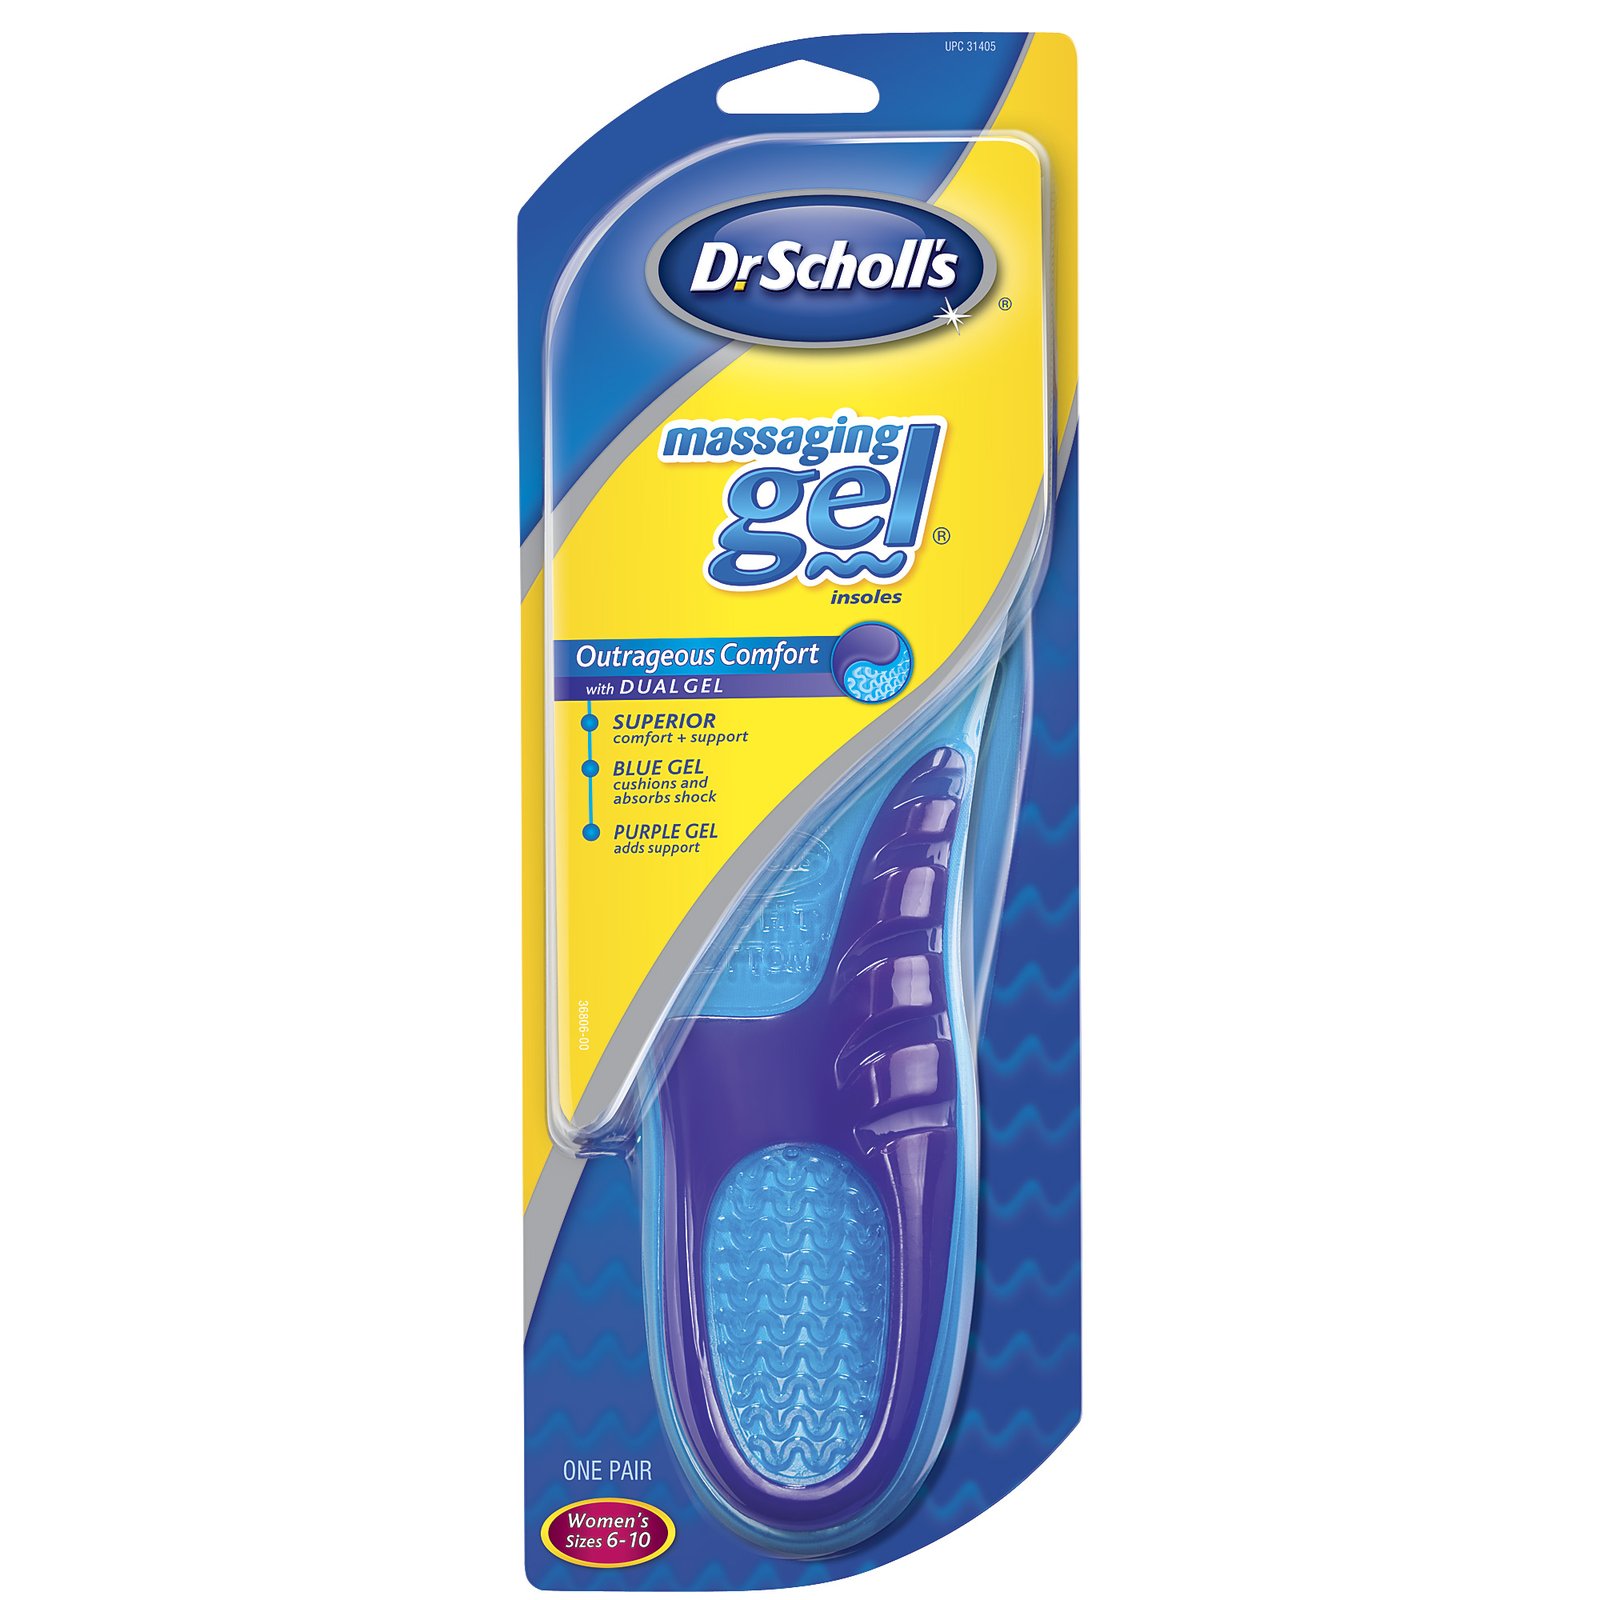 Tender Allure Review Of Dr Scholl s Massaging Gel Insoles For Women